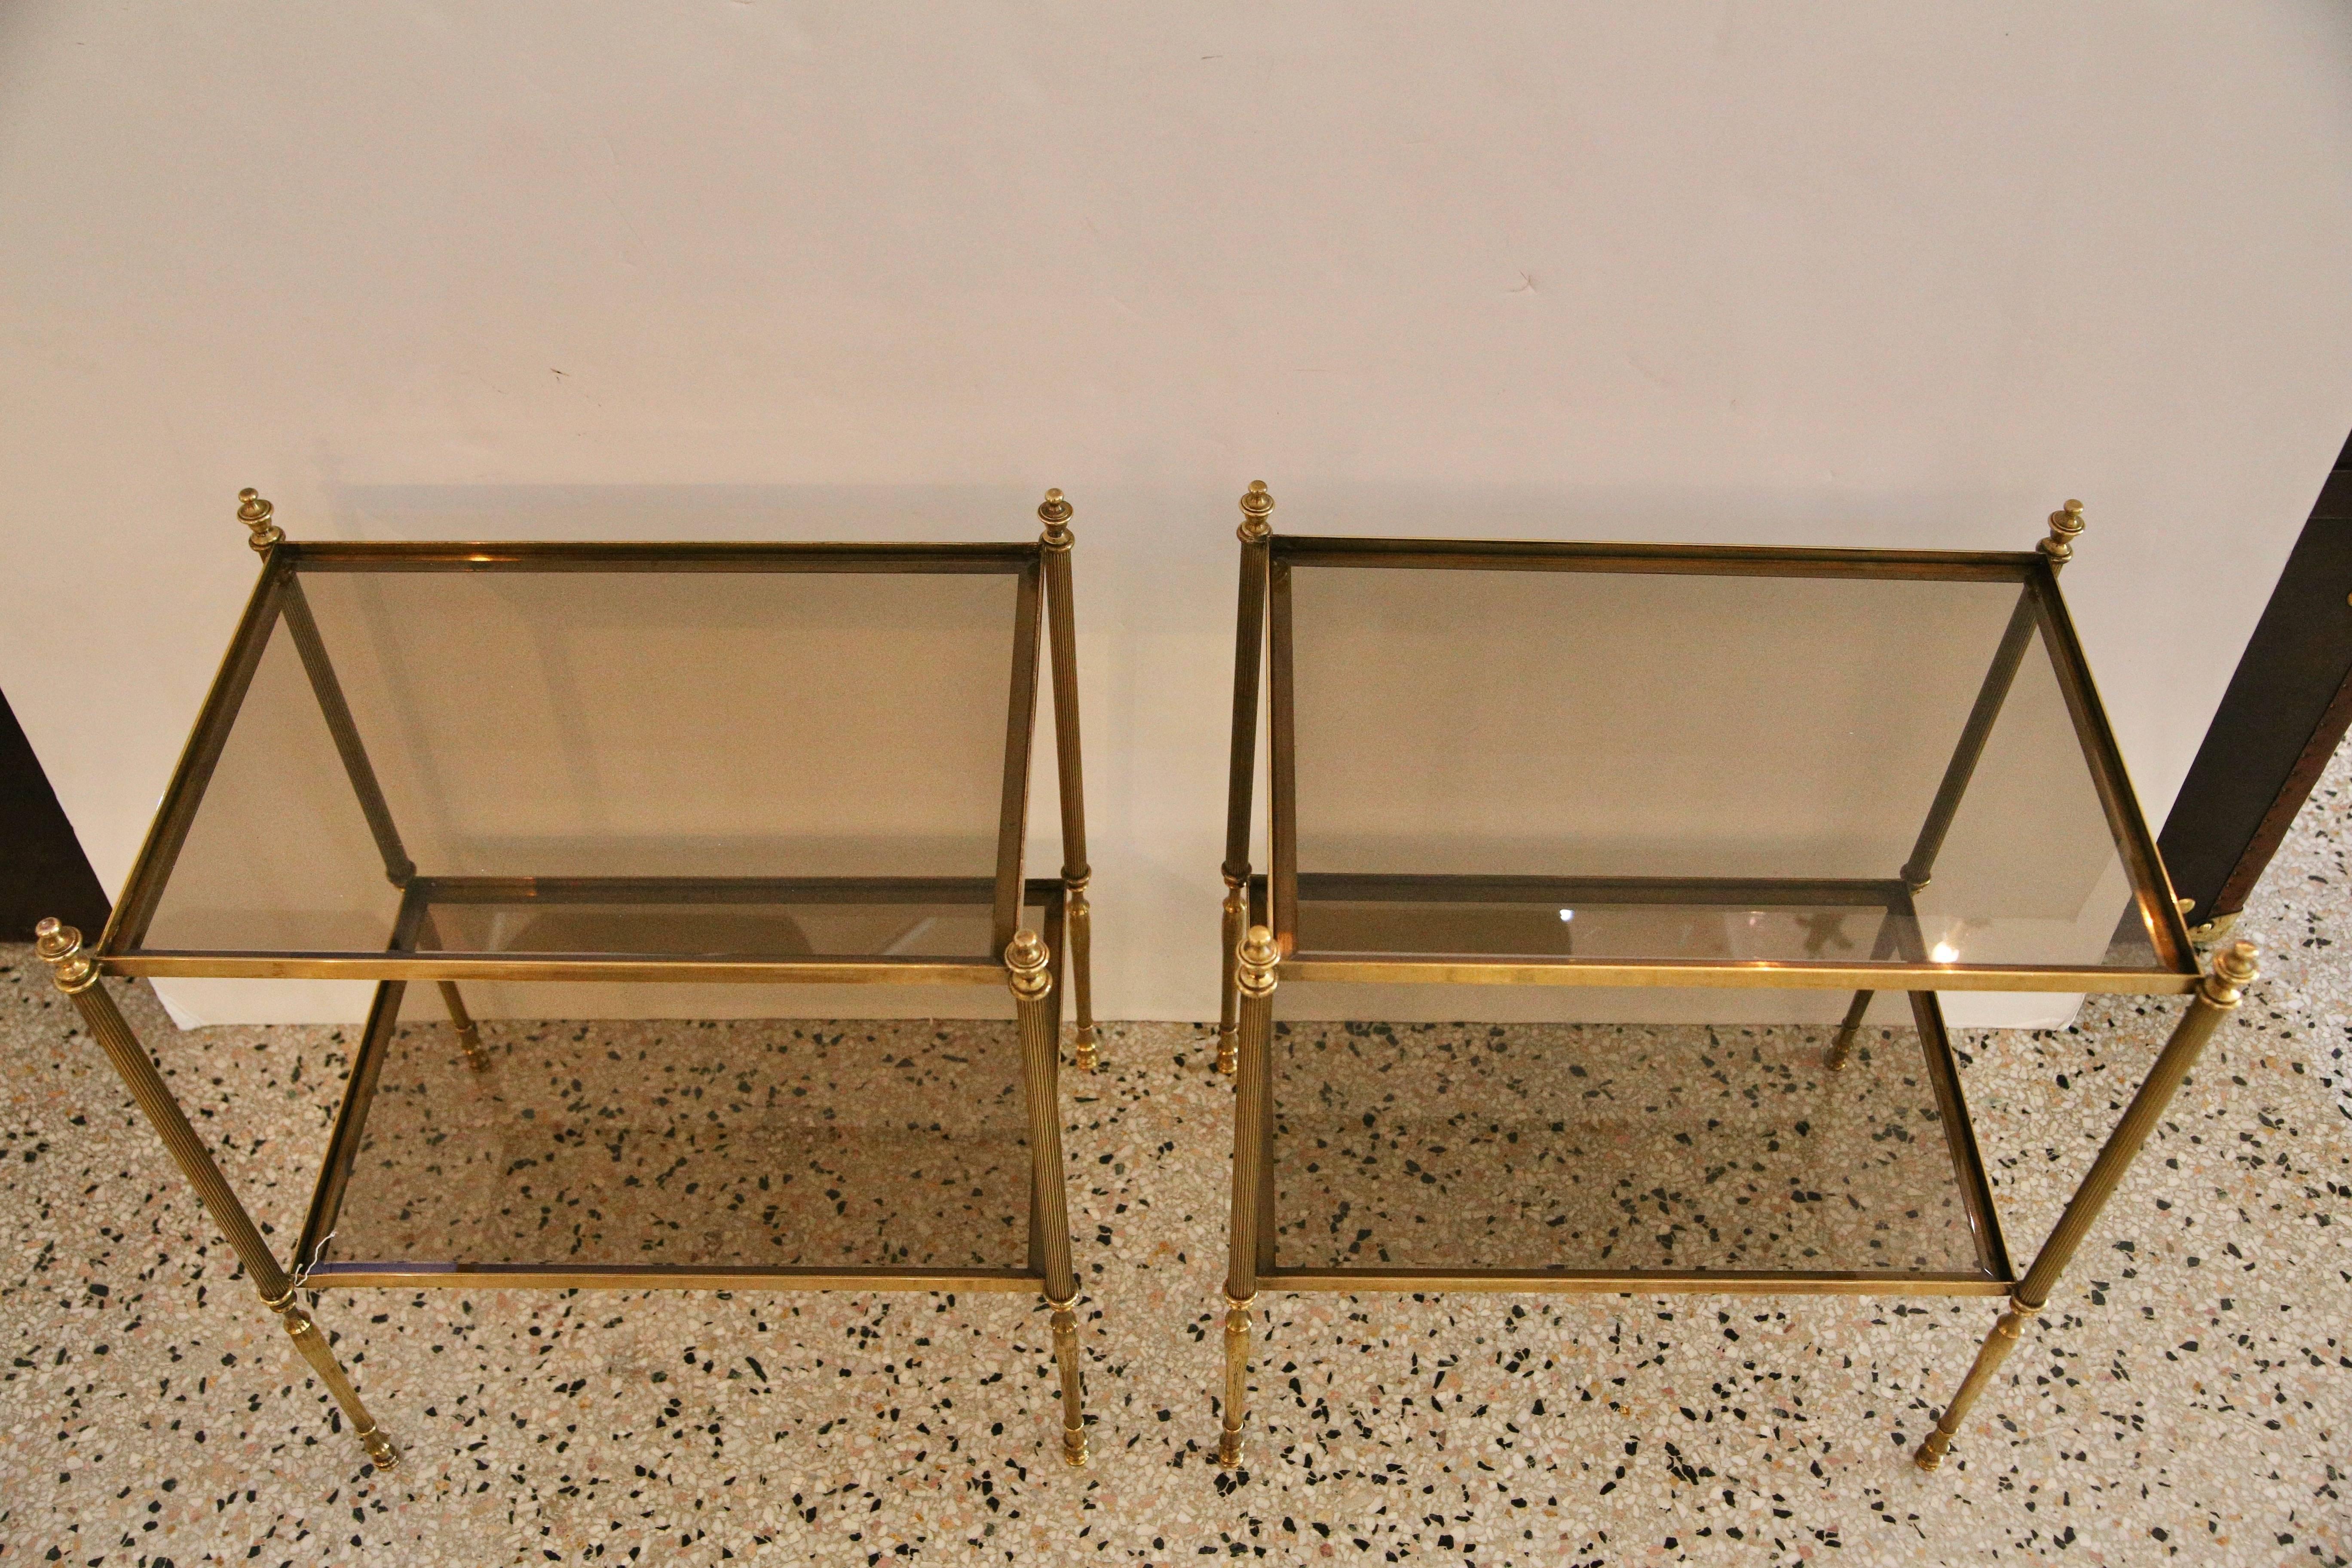 This stylish pair of side tables were recently purchased in London and are in the style of Maison Baguès. The glass has a clear-smokey bronze coloration which compliments the antique brass finish.